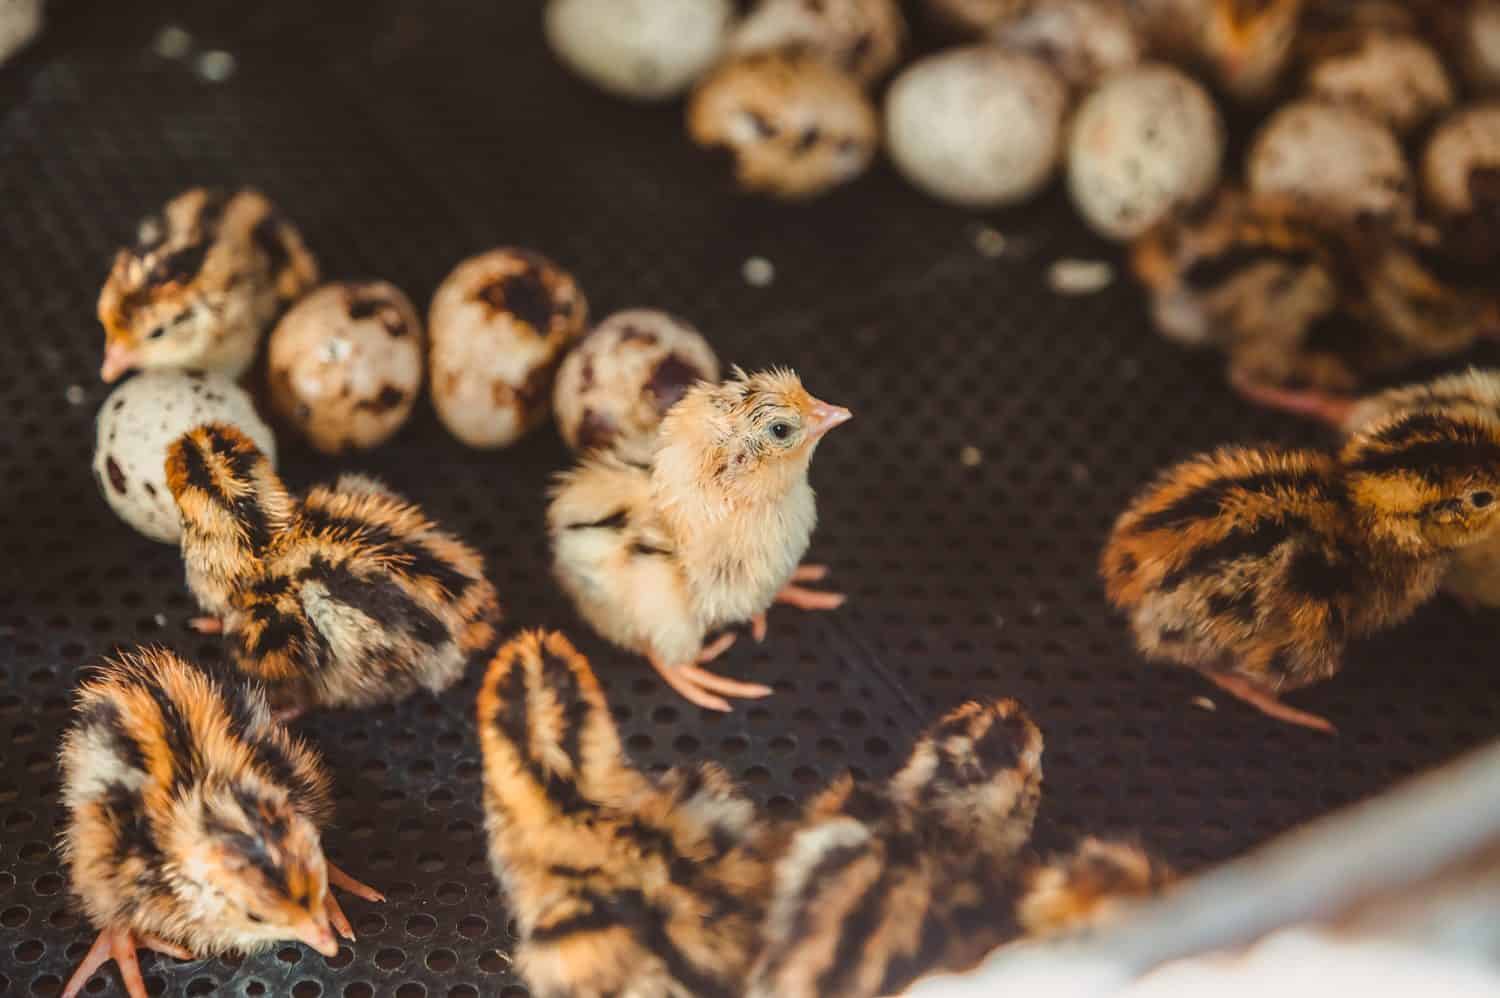 A newborn quail baby stands among the Chicks and eggs in an incubator. 